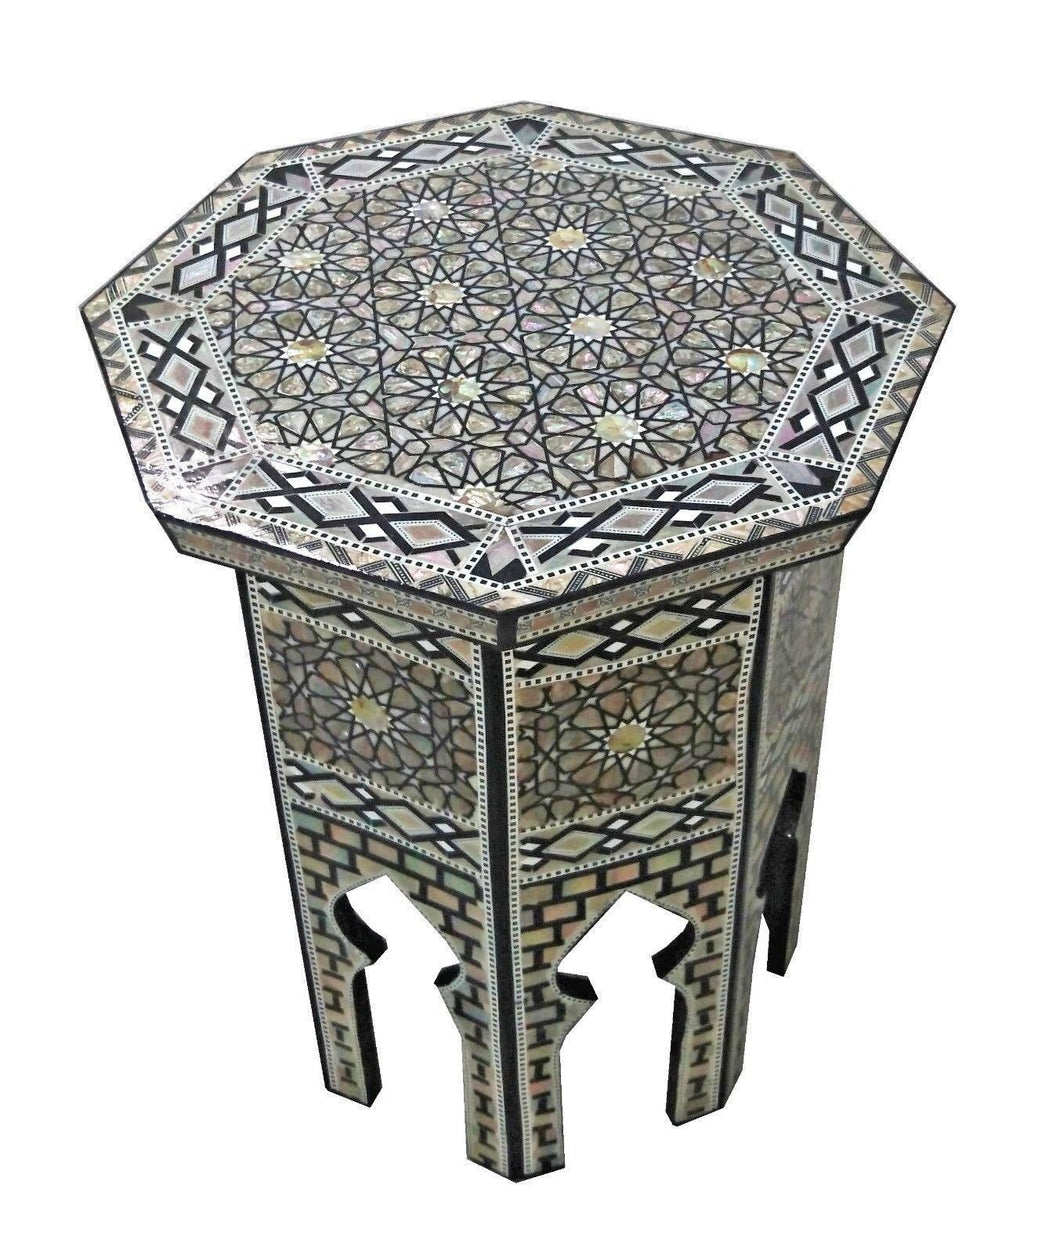 W104 Mother of Pearl Octagonal Corner Wood Table Arabesque End Coffee Trinket